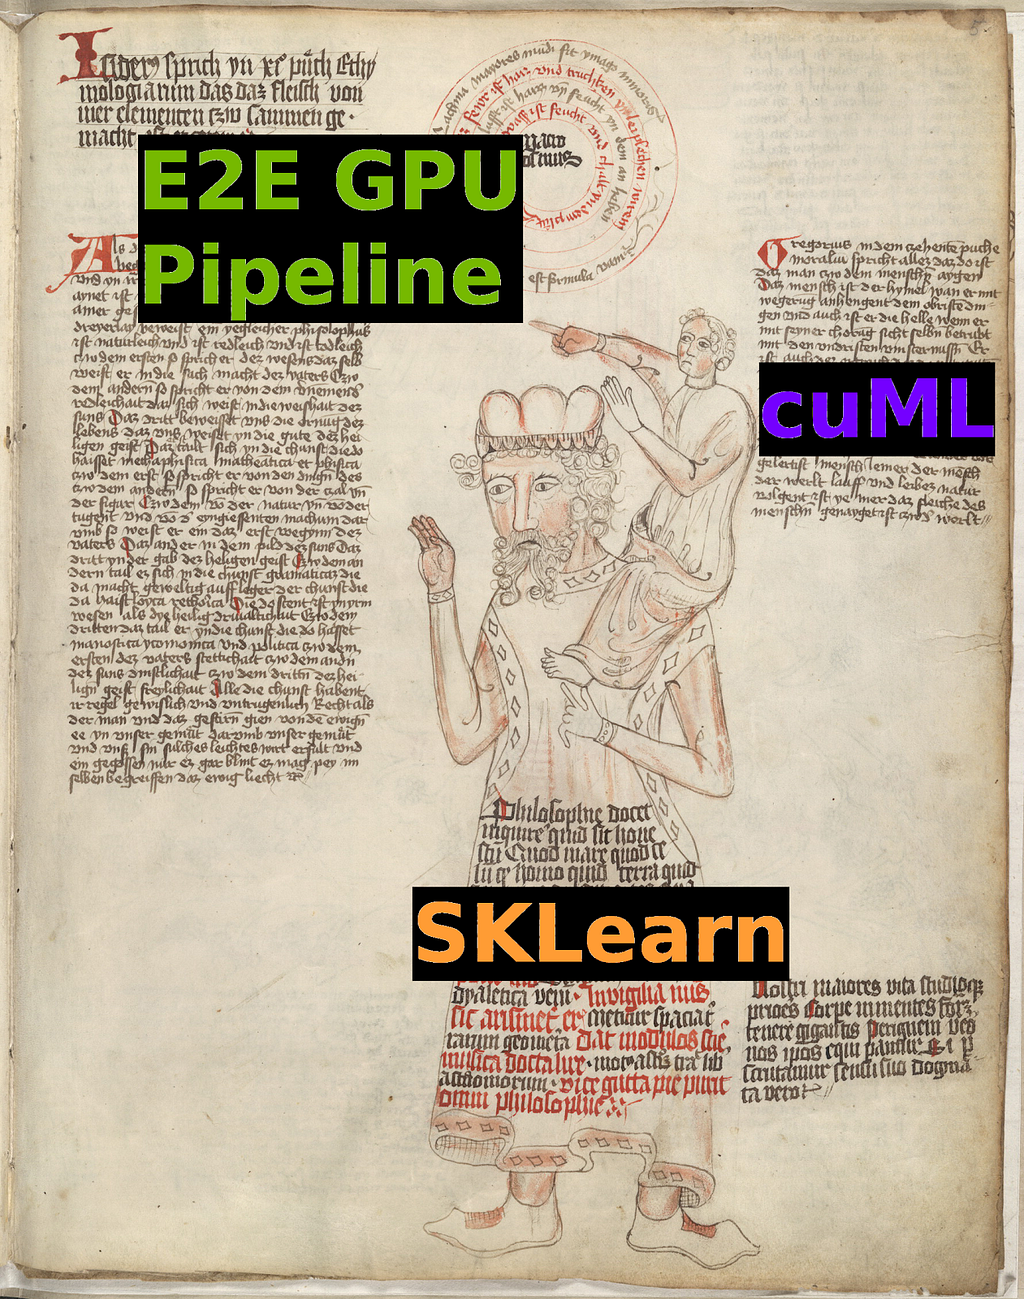 Medieval picture of dwarf (cuML) on the shoulder of a giant (Scikit-Learn)